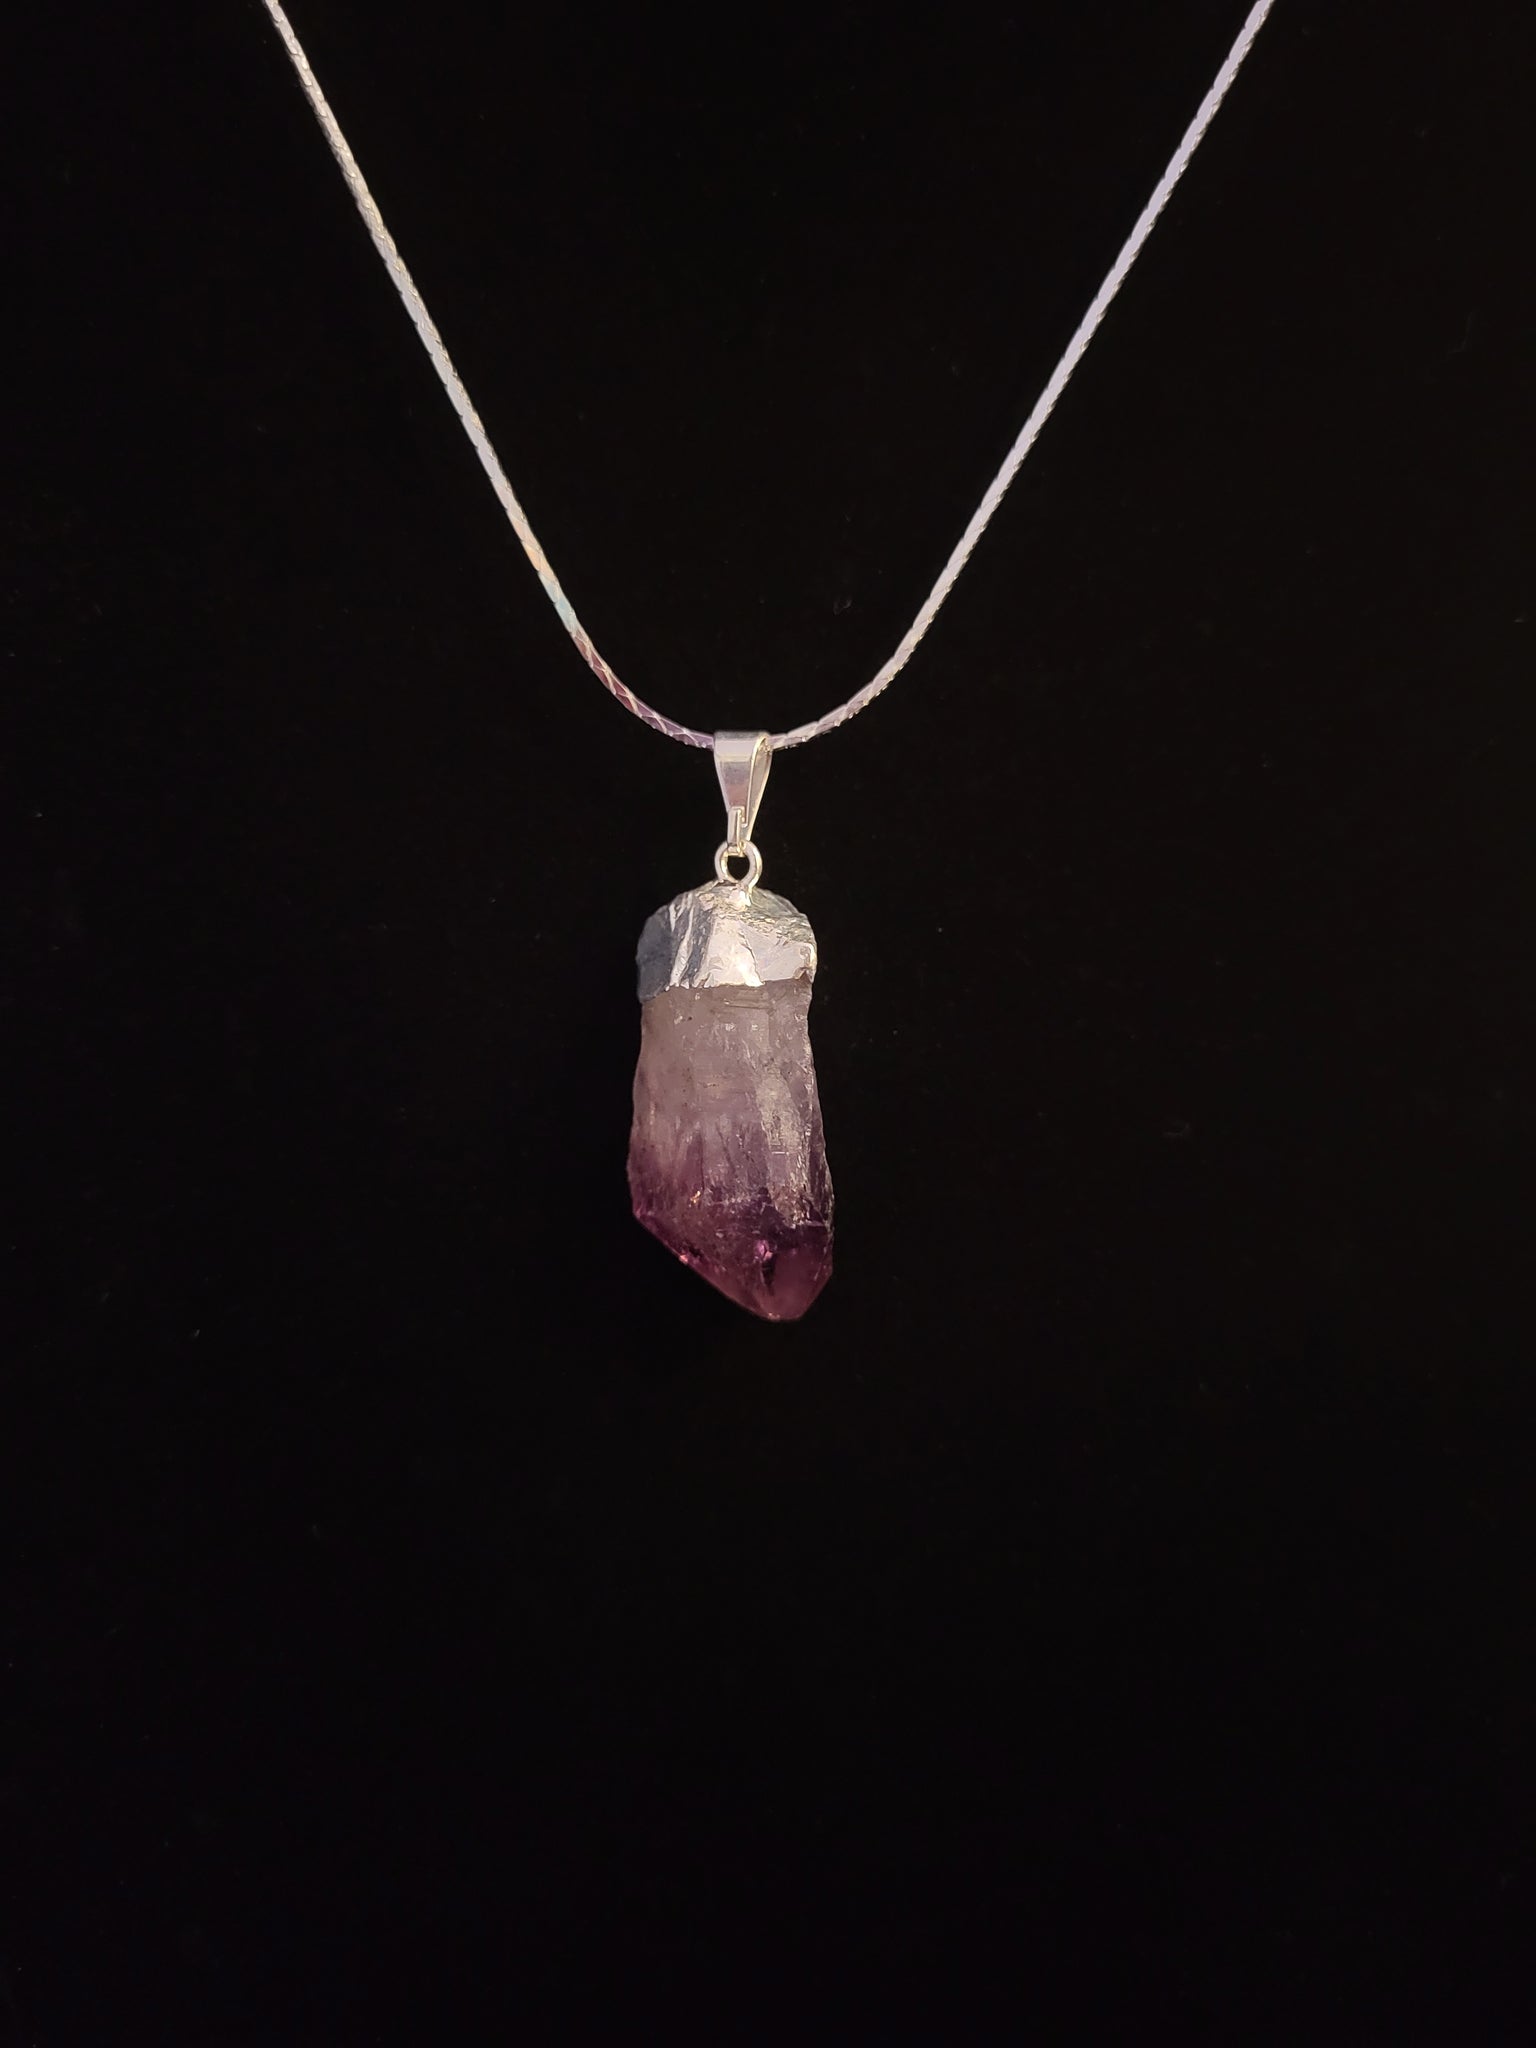 Rough Amethyst Necklace -Silver finish